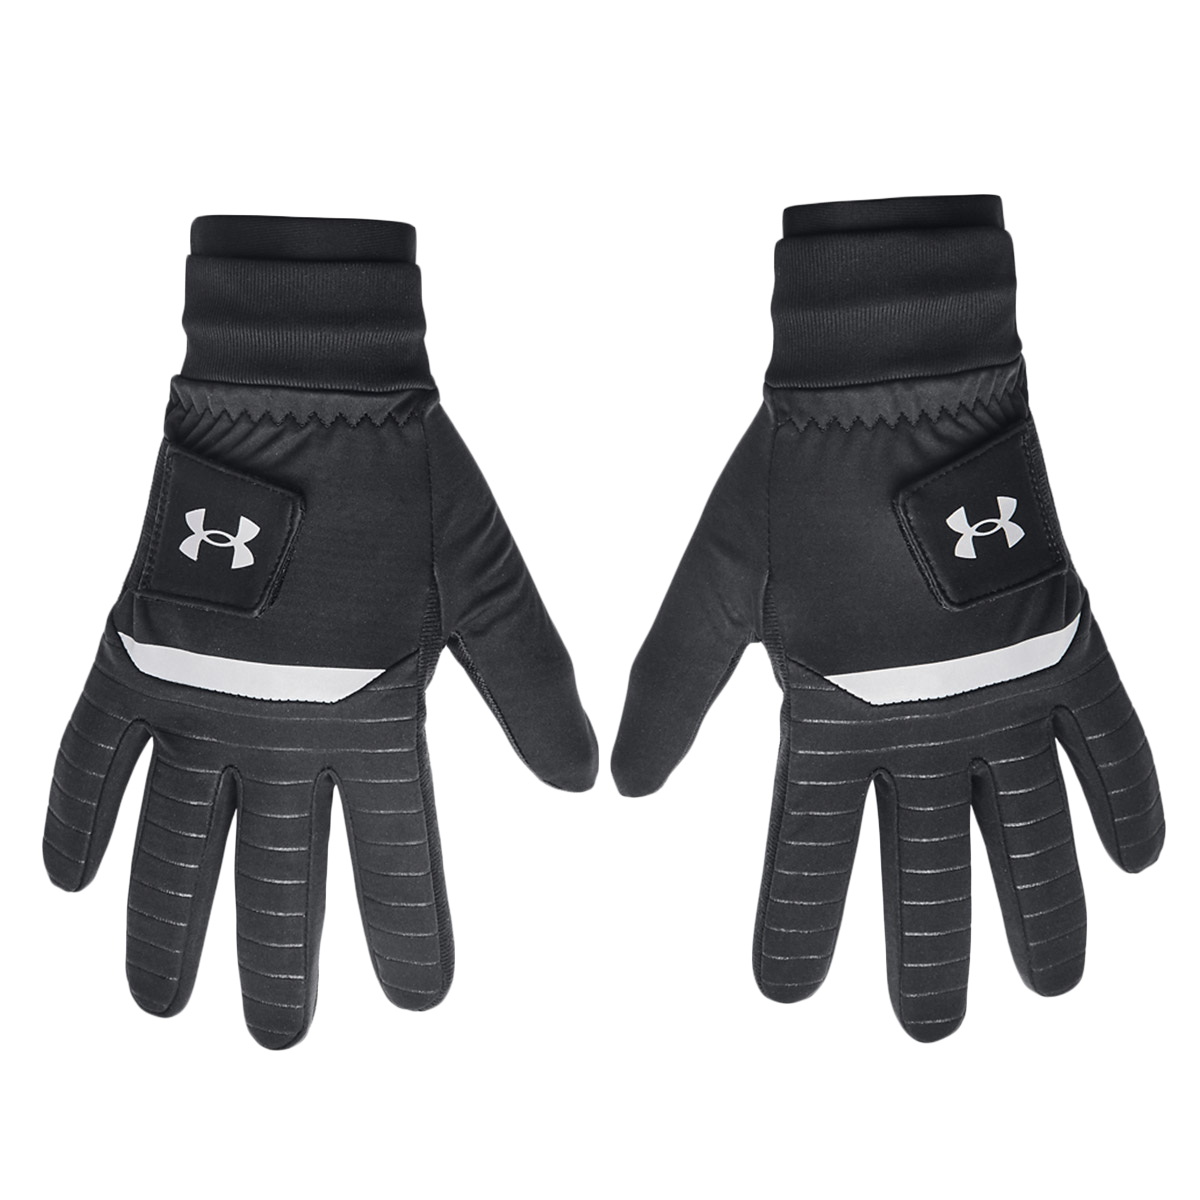 https://www.americangolf.co.uk/on/demandware.static/-/Sites-master-catalog/default/dw867f3ea1/images-square/zoom/389262-Black-PitchGray-Under-Armour-CGI-Golf-Gloves-Pair-1.jpg